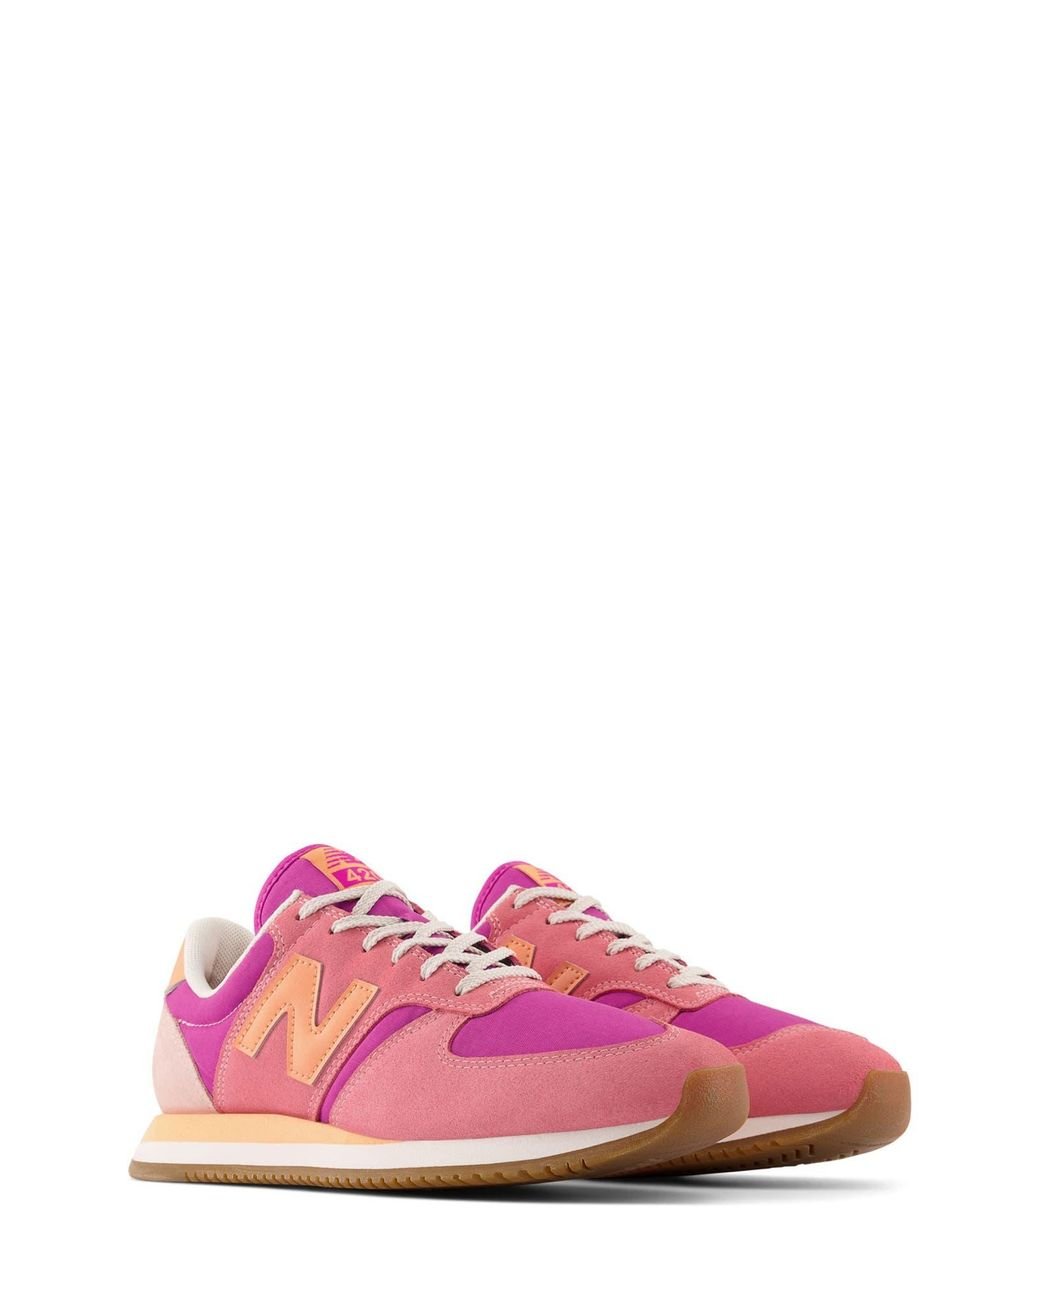 New Balance 420 Colorblock Sneaker in Pink | Lyst